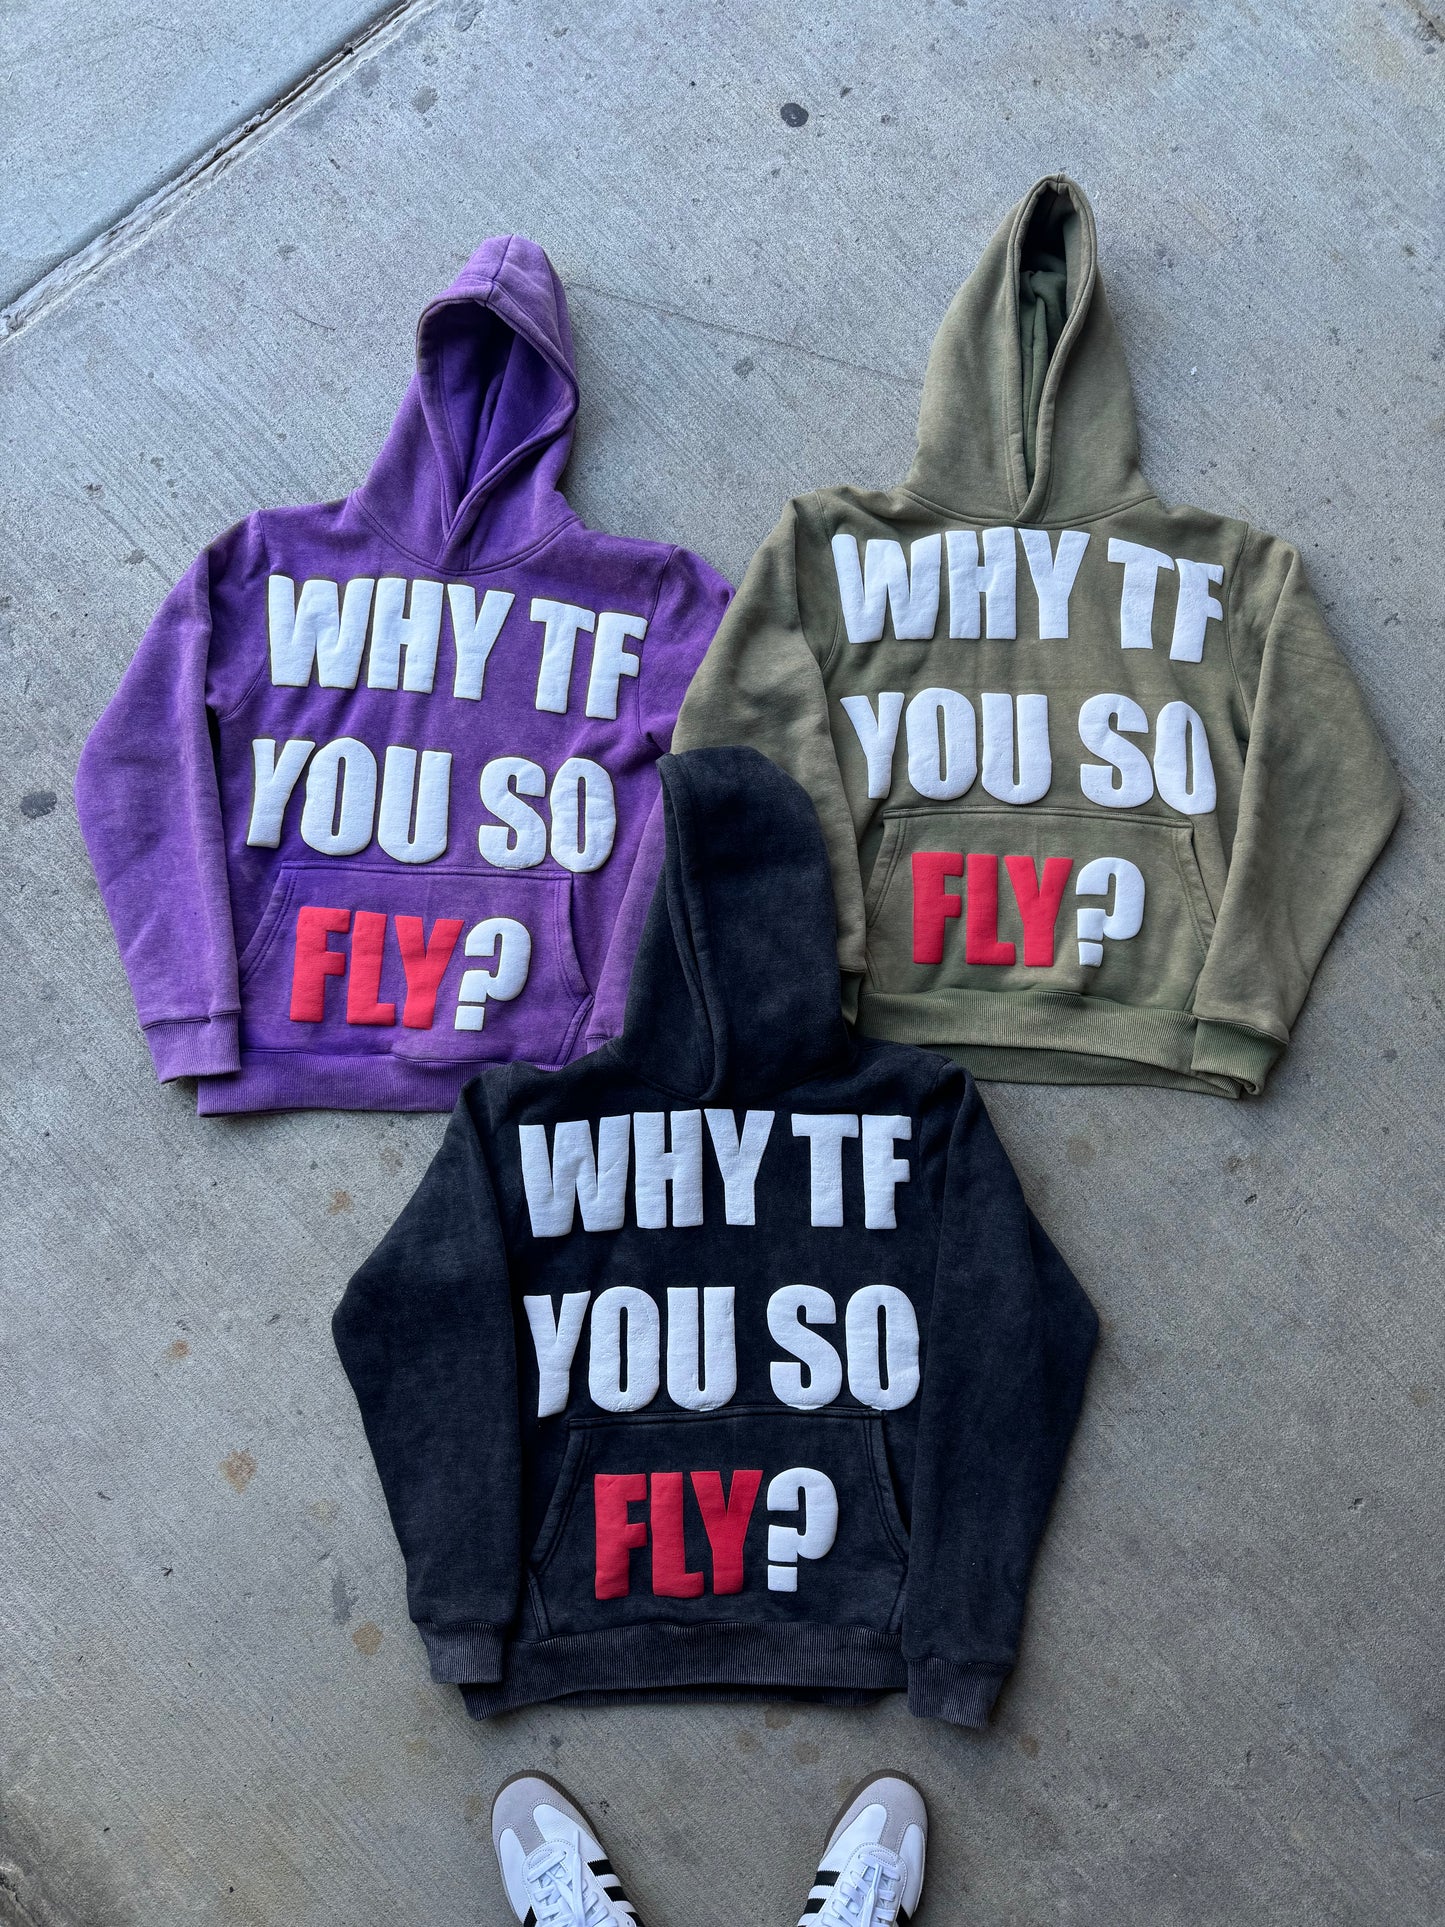 “WHY TF YOU SO FLY?” HOODIES